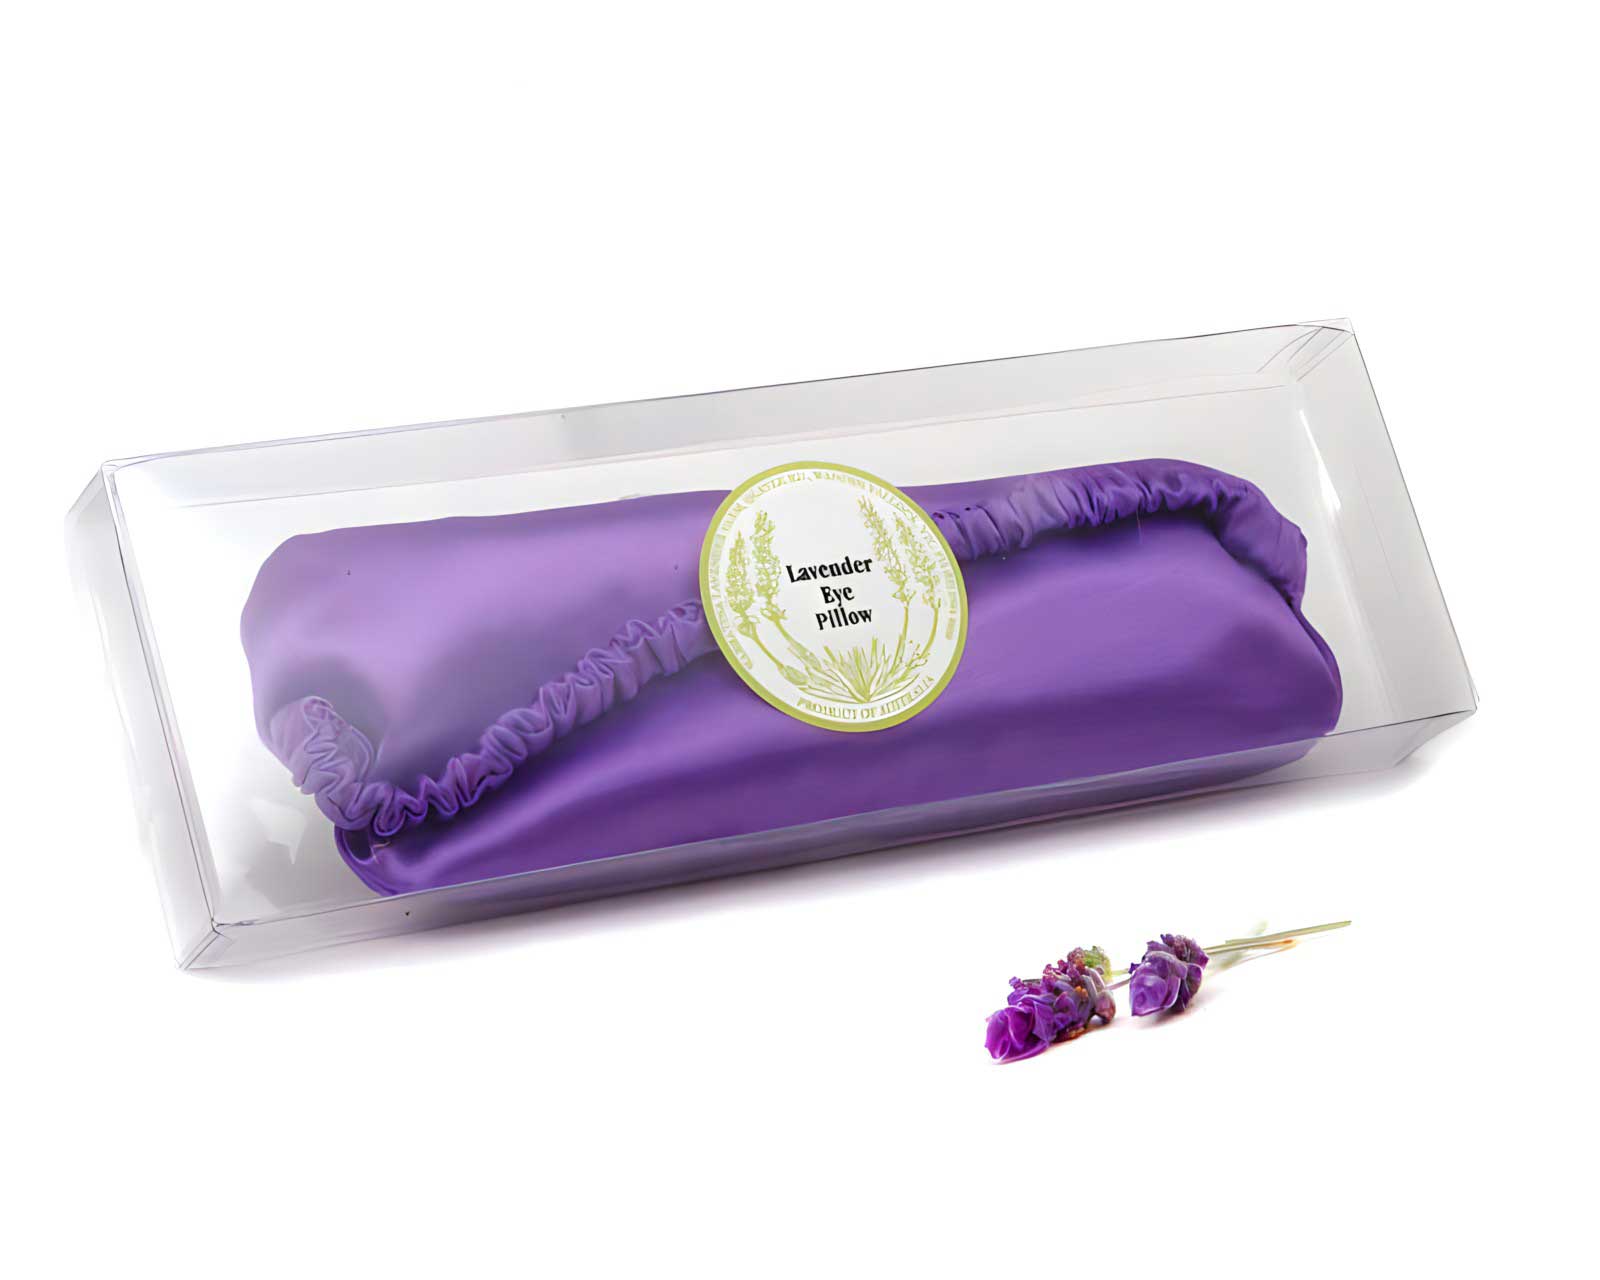 Eye pillow filled with fragrant and restful lavender